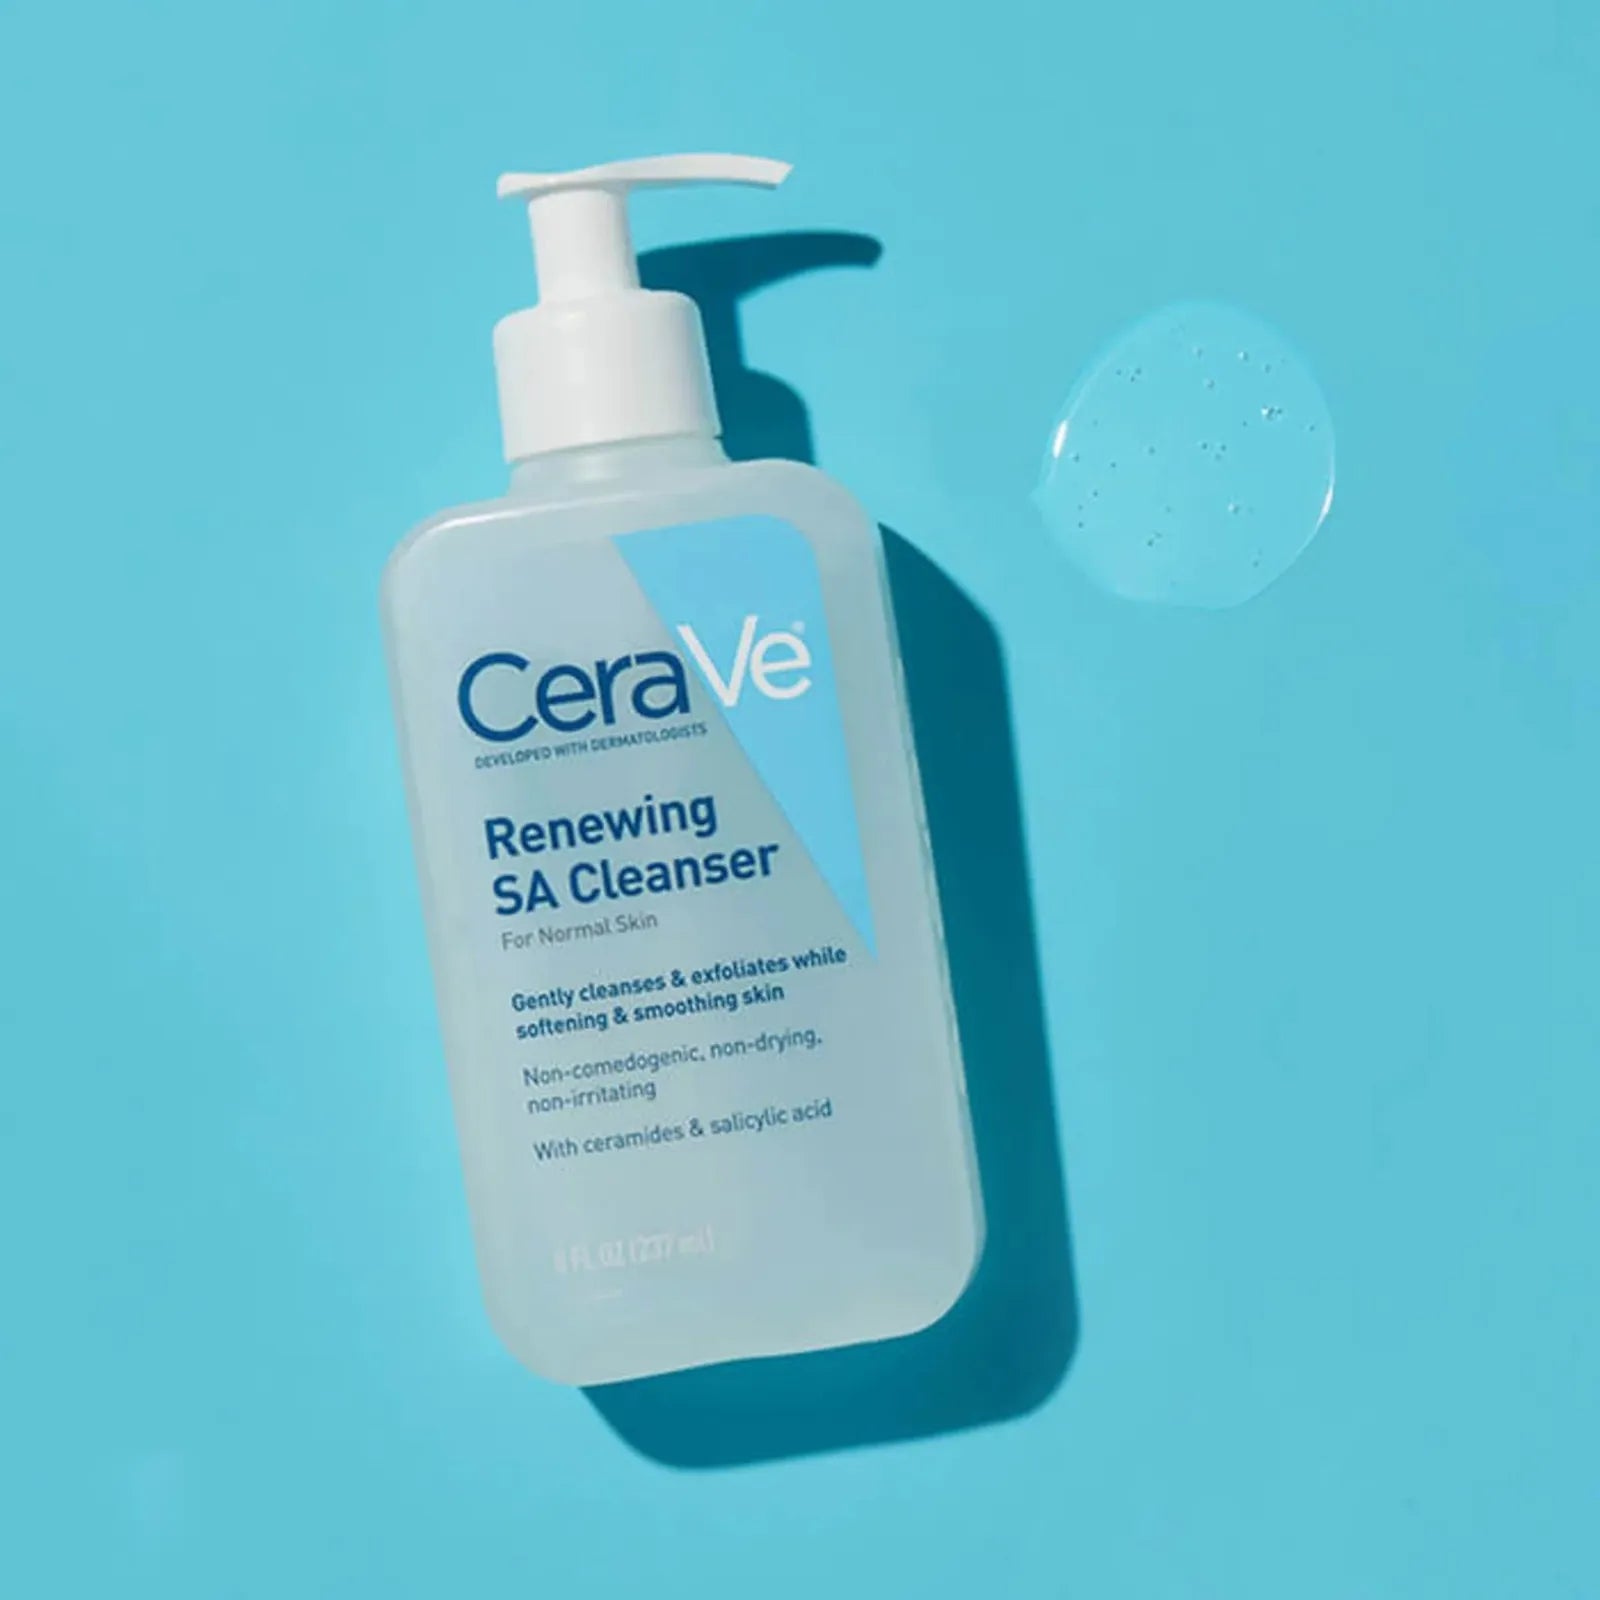  Gently exfoliate & renew normal skin with salicylic acid, ceramides & hyaluronic acid. CeraVe SA Cleanser for Normal Skin 237ml - Discover the Power of Renewal